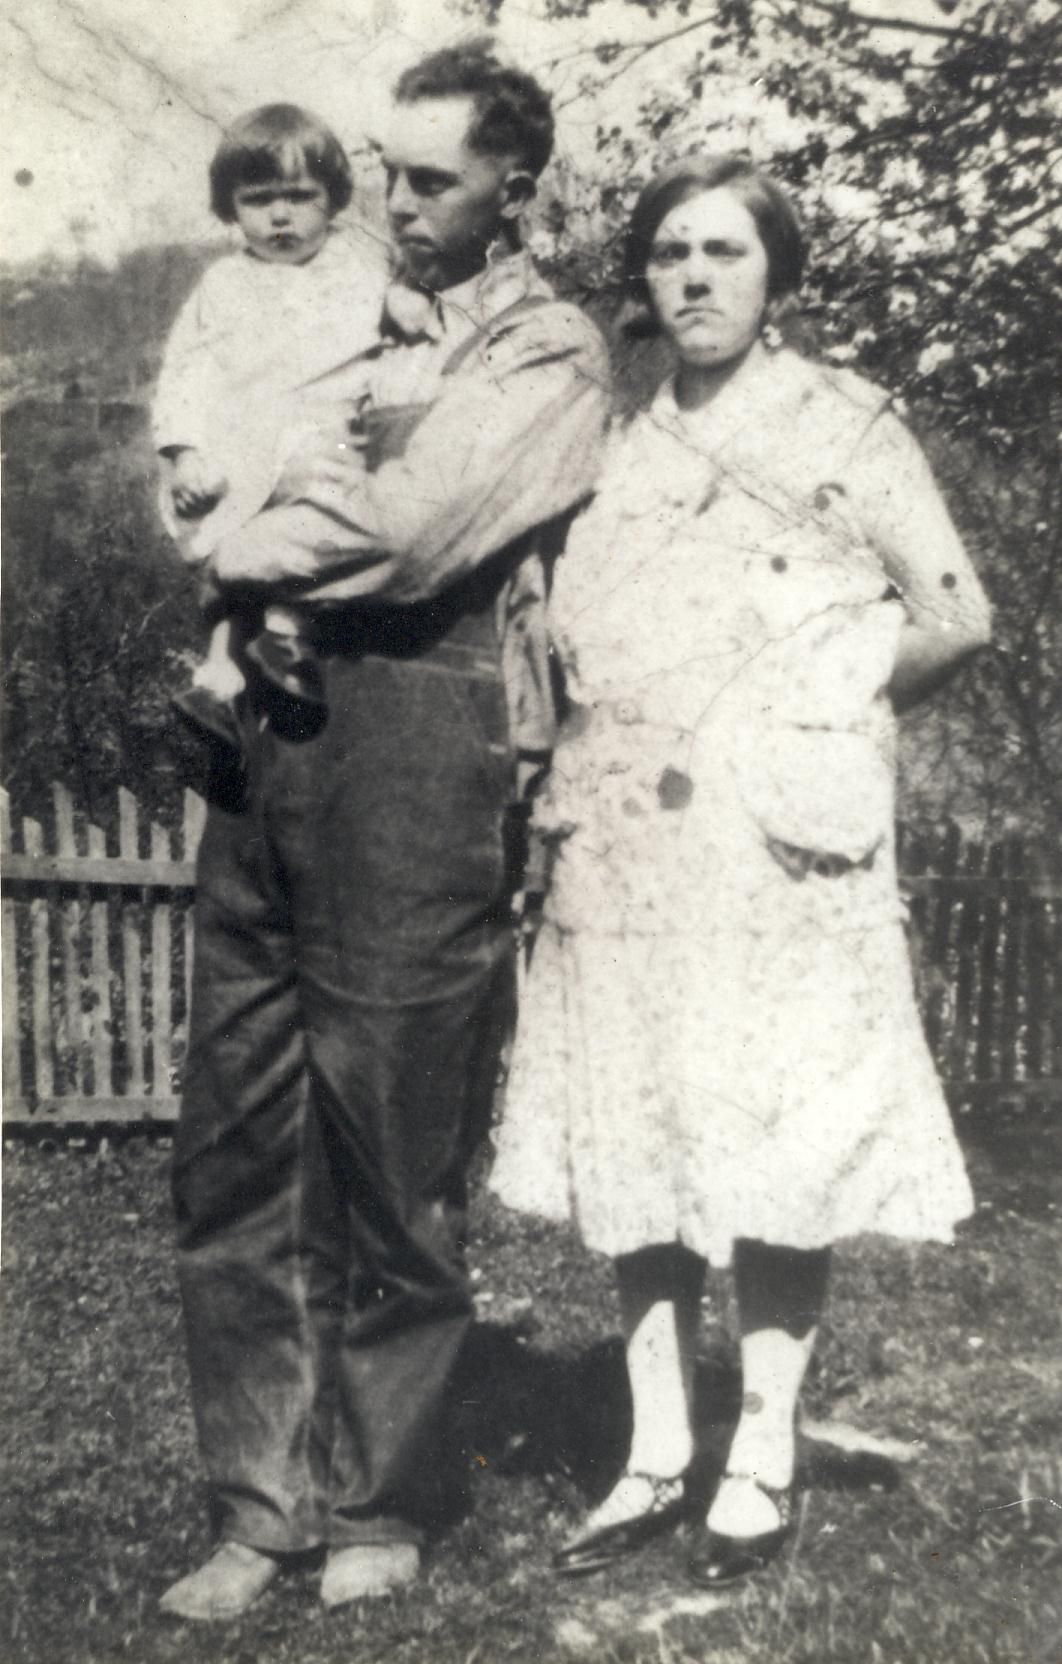 a man holding a baby standing next to his wife